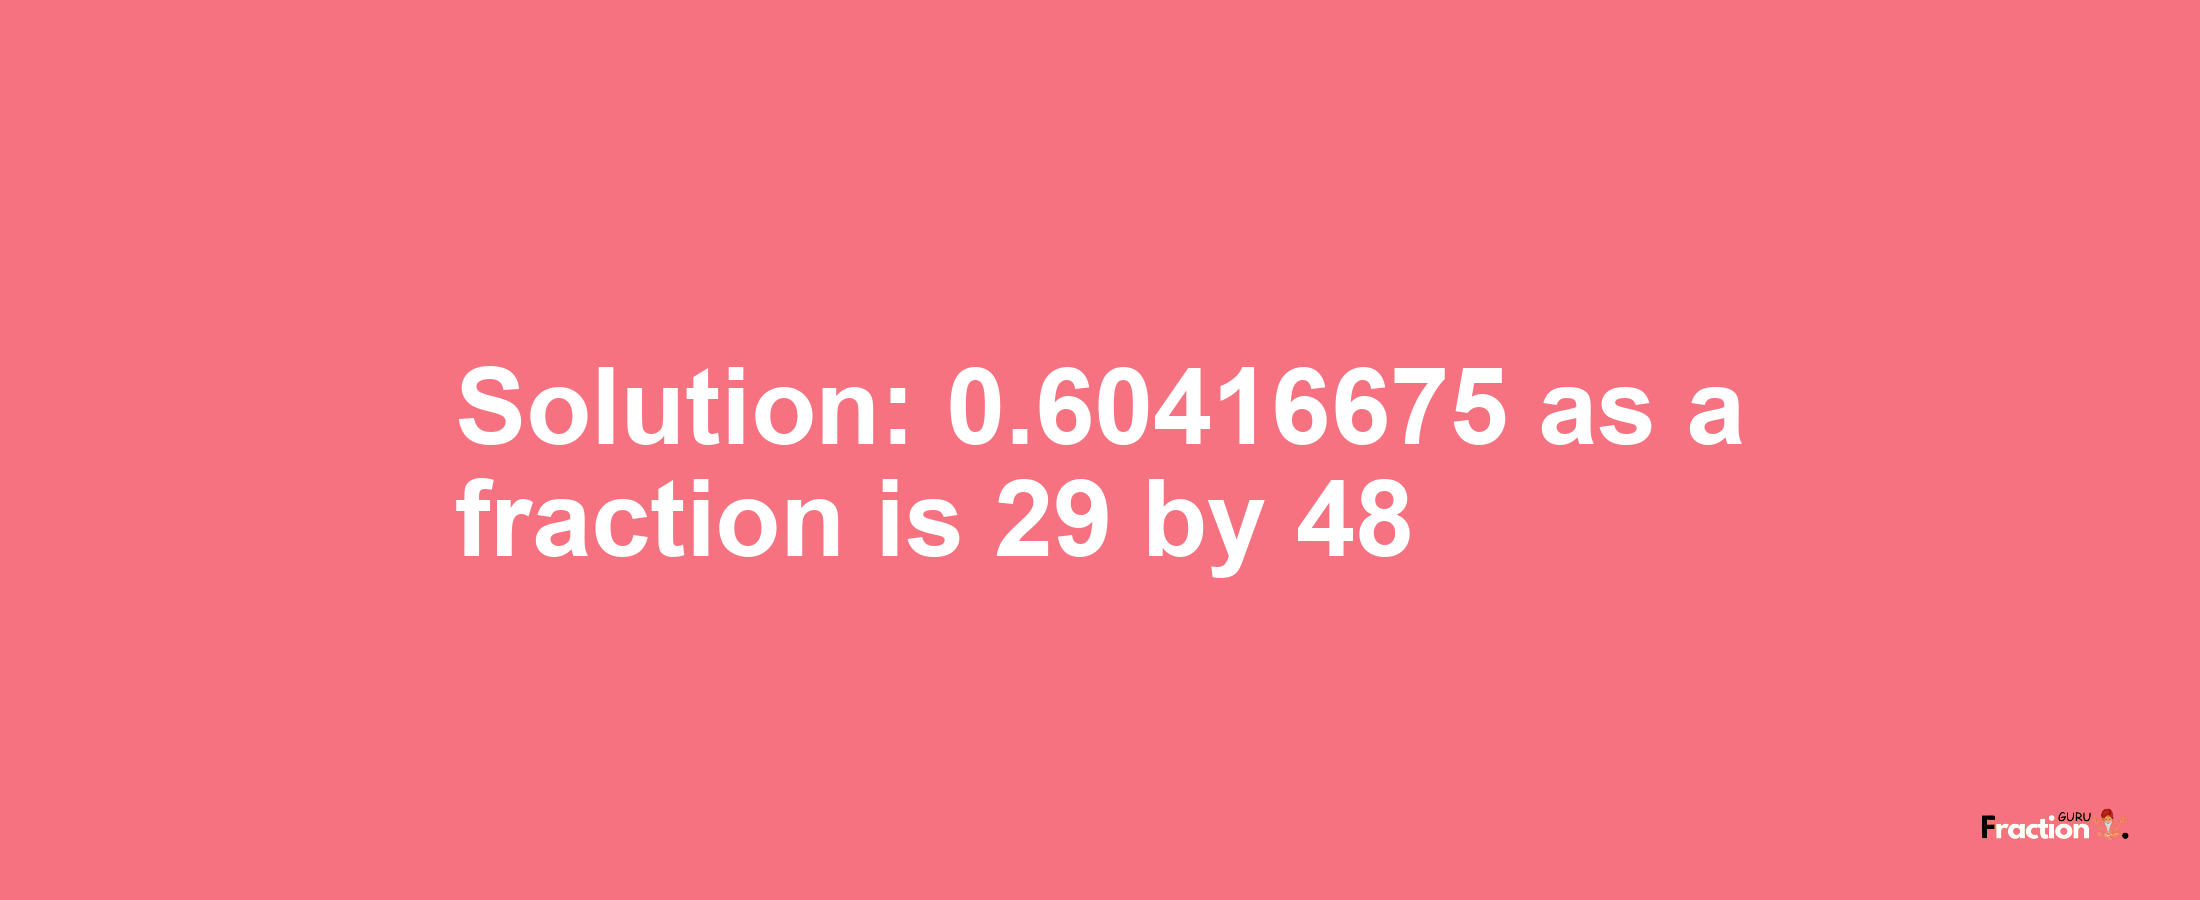 Solution:0.60416675 as a fraction is 29/48